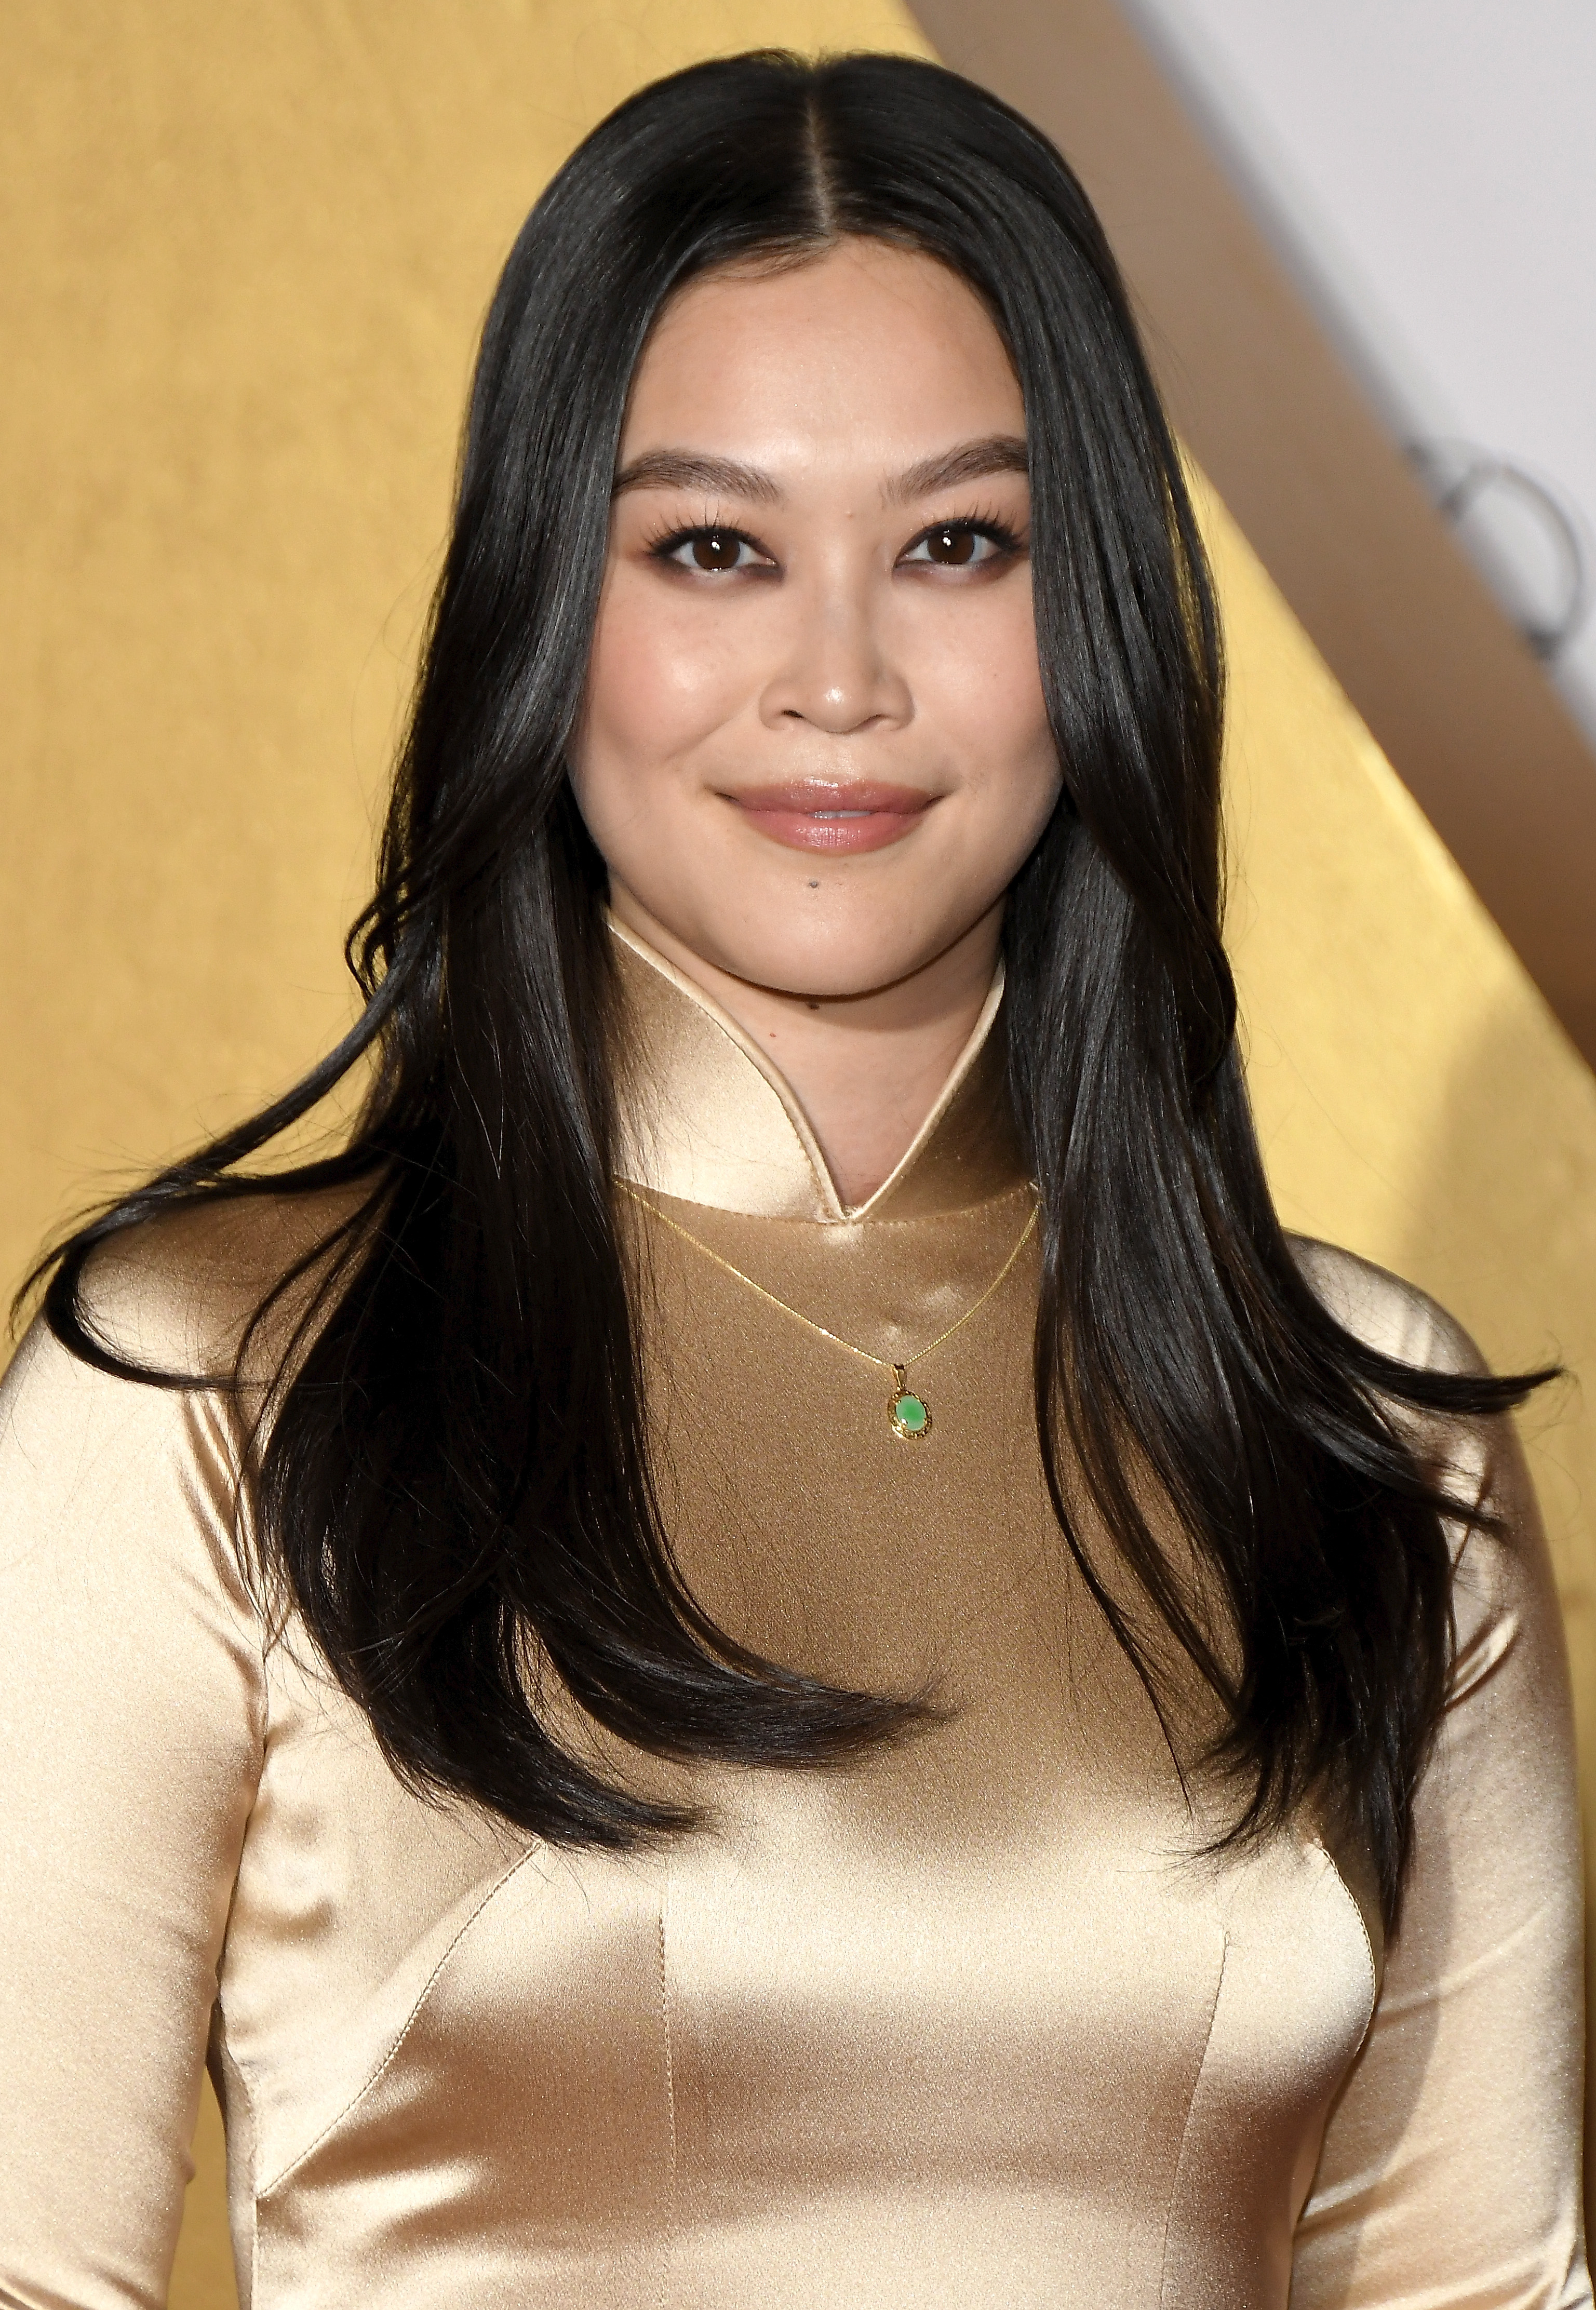 Dianne Doan at the Annual 2021 Unforgettable Gala hosted by Character Media at the Beverly Hilton on December 11, 2021 in Los Angeles, CA